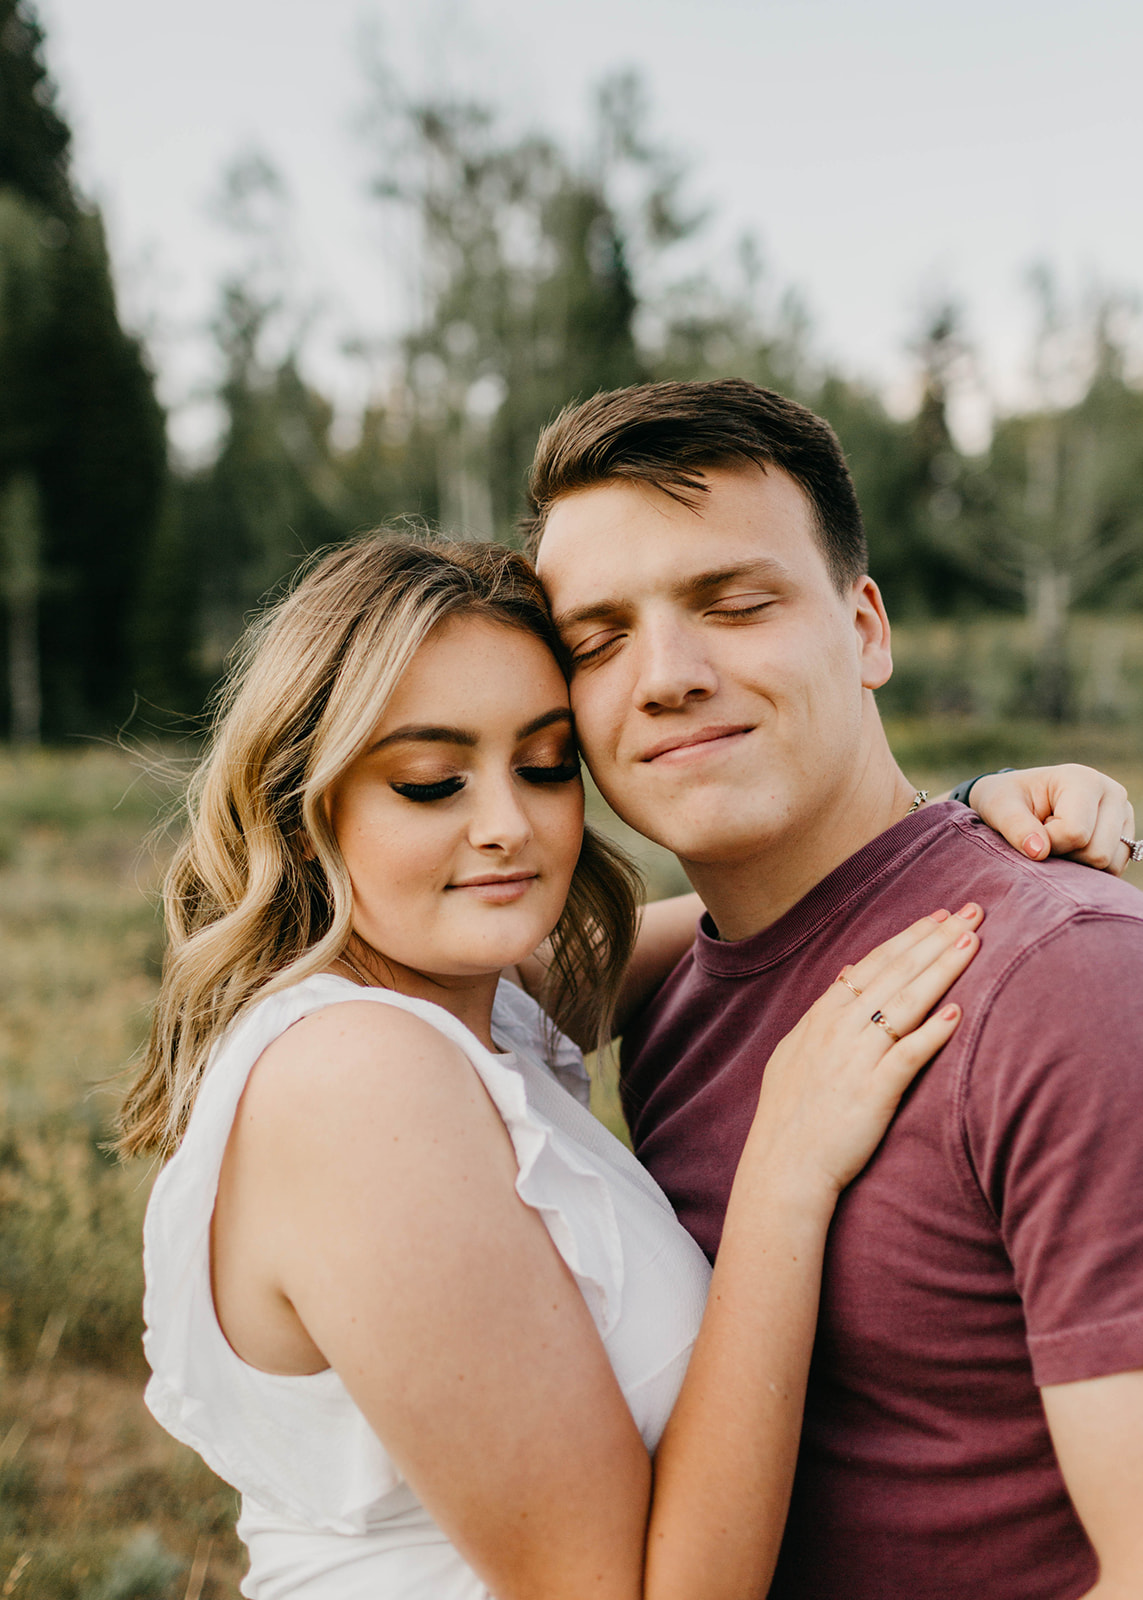 Couples session in utah summer | Hayden and Megan Photo + Film